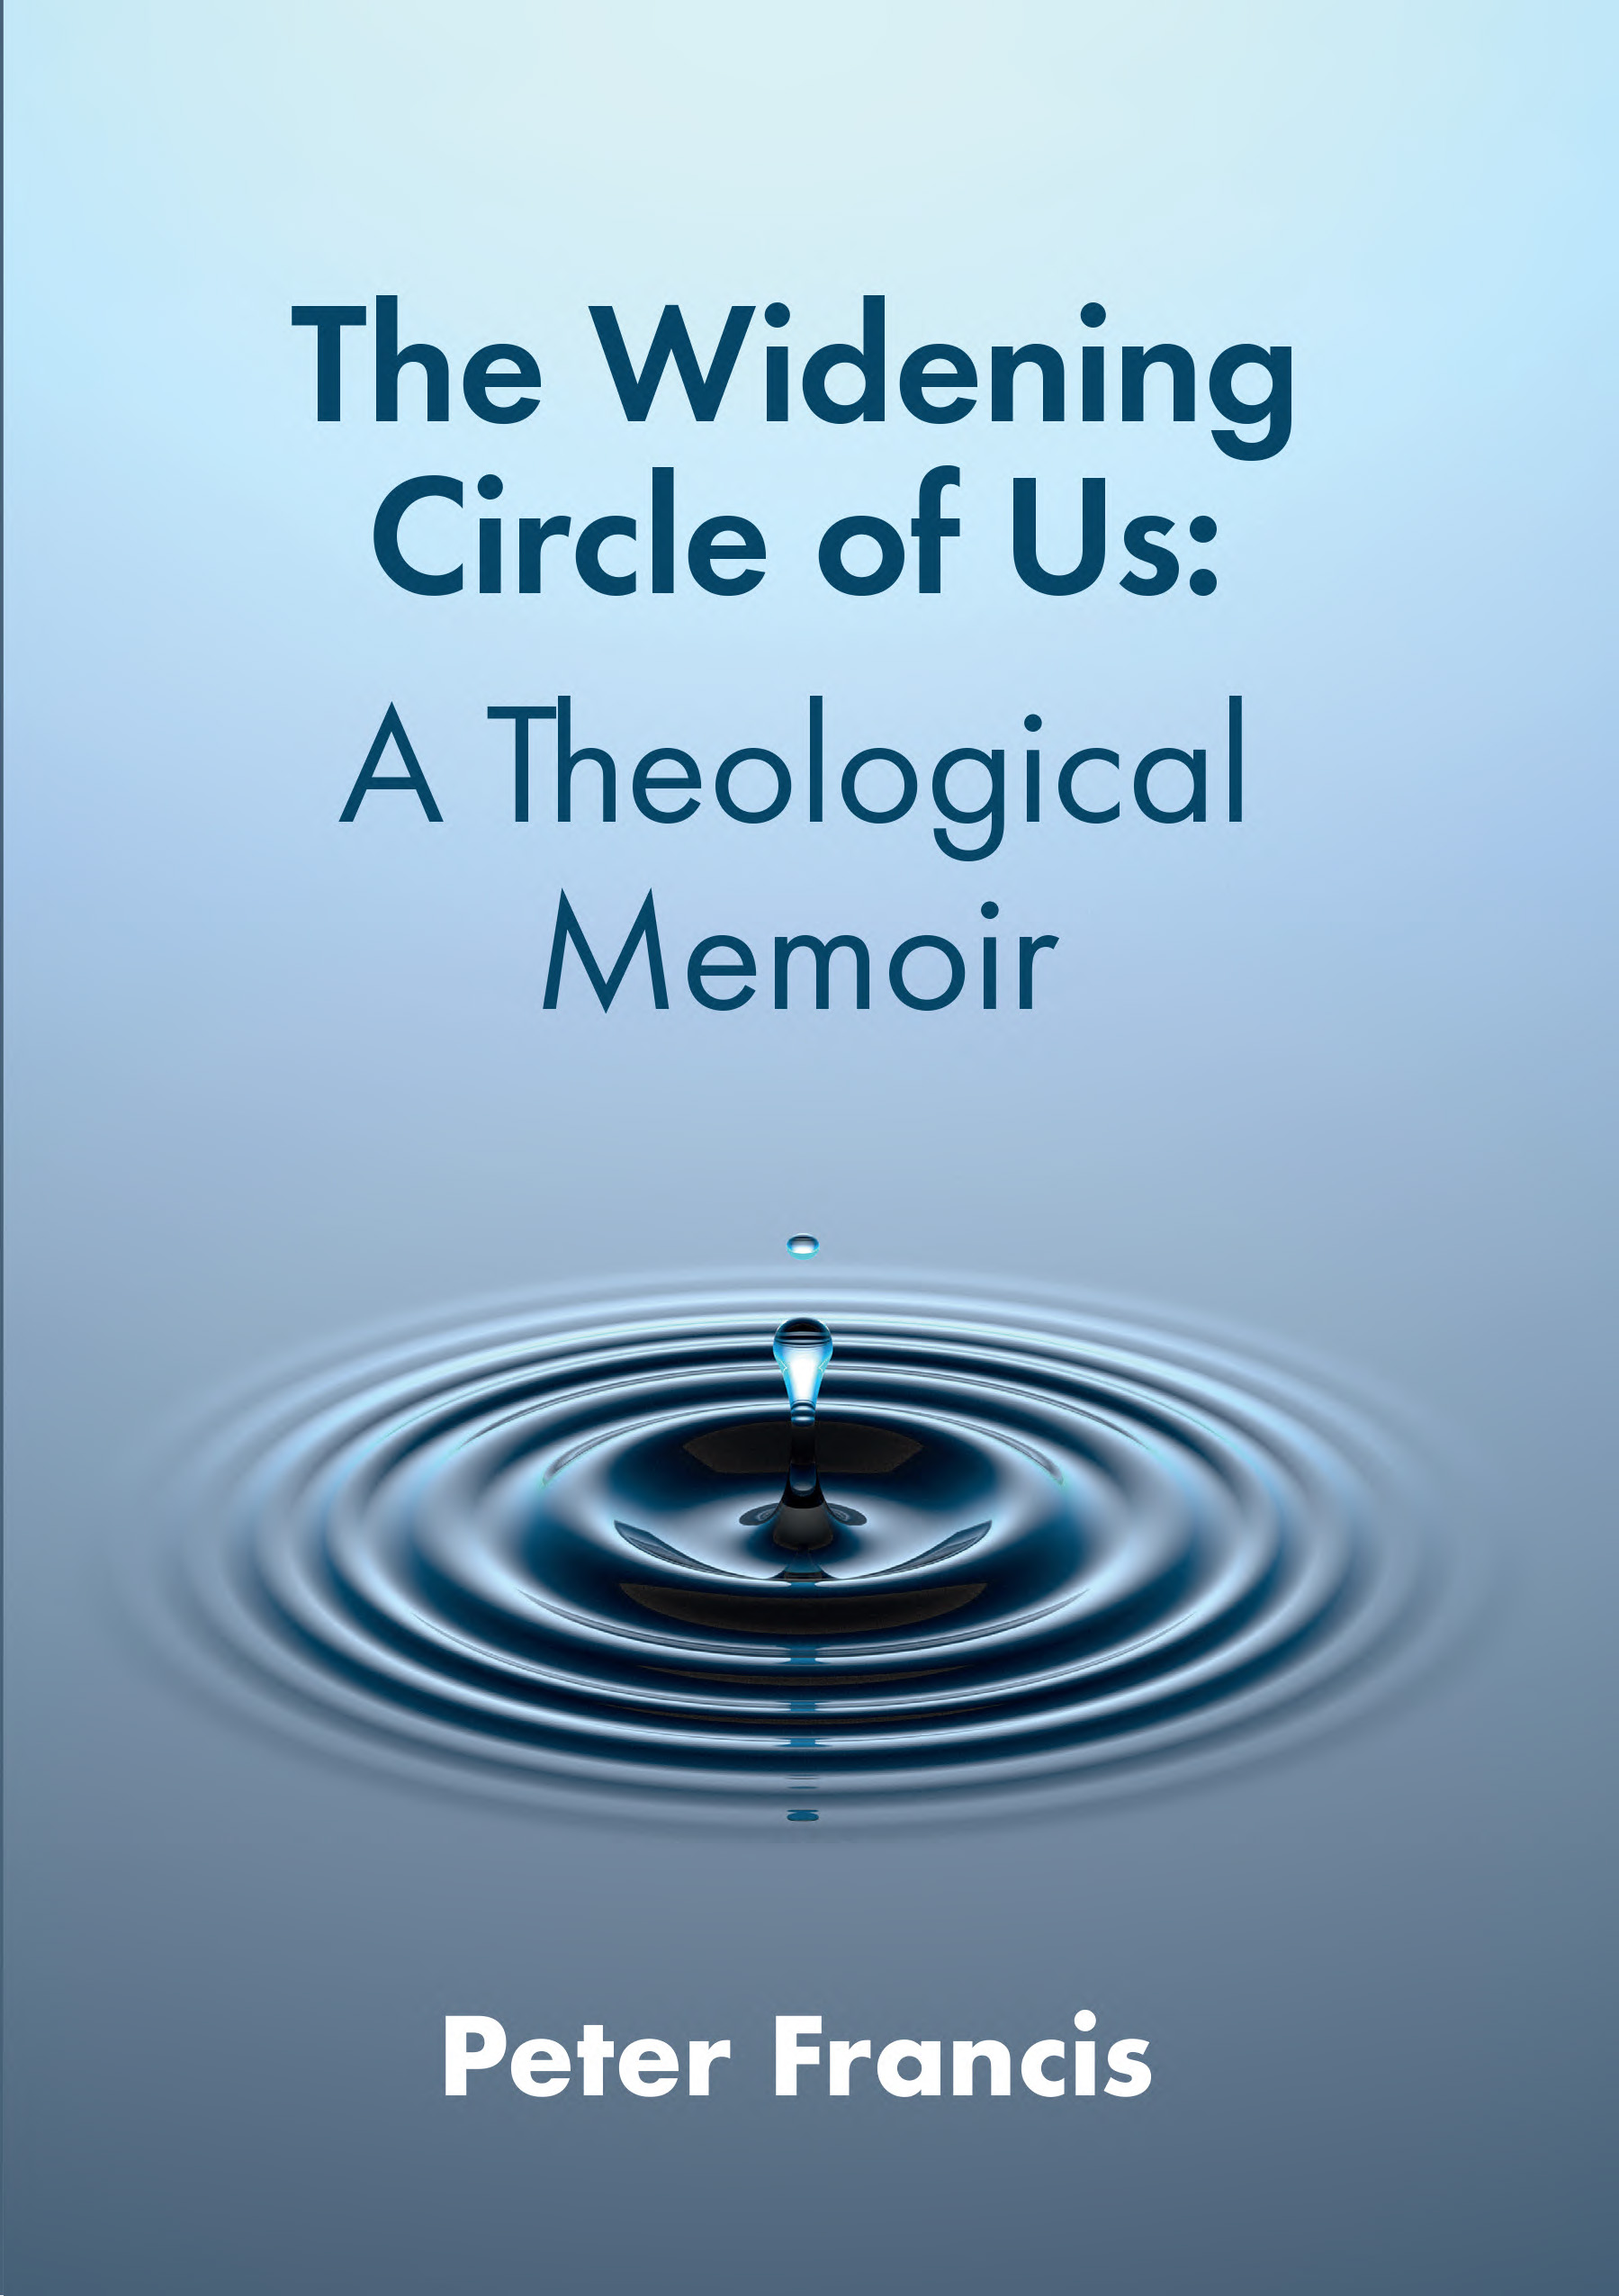 The Widening Circle of Us: A Theological Memoir